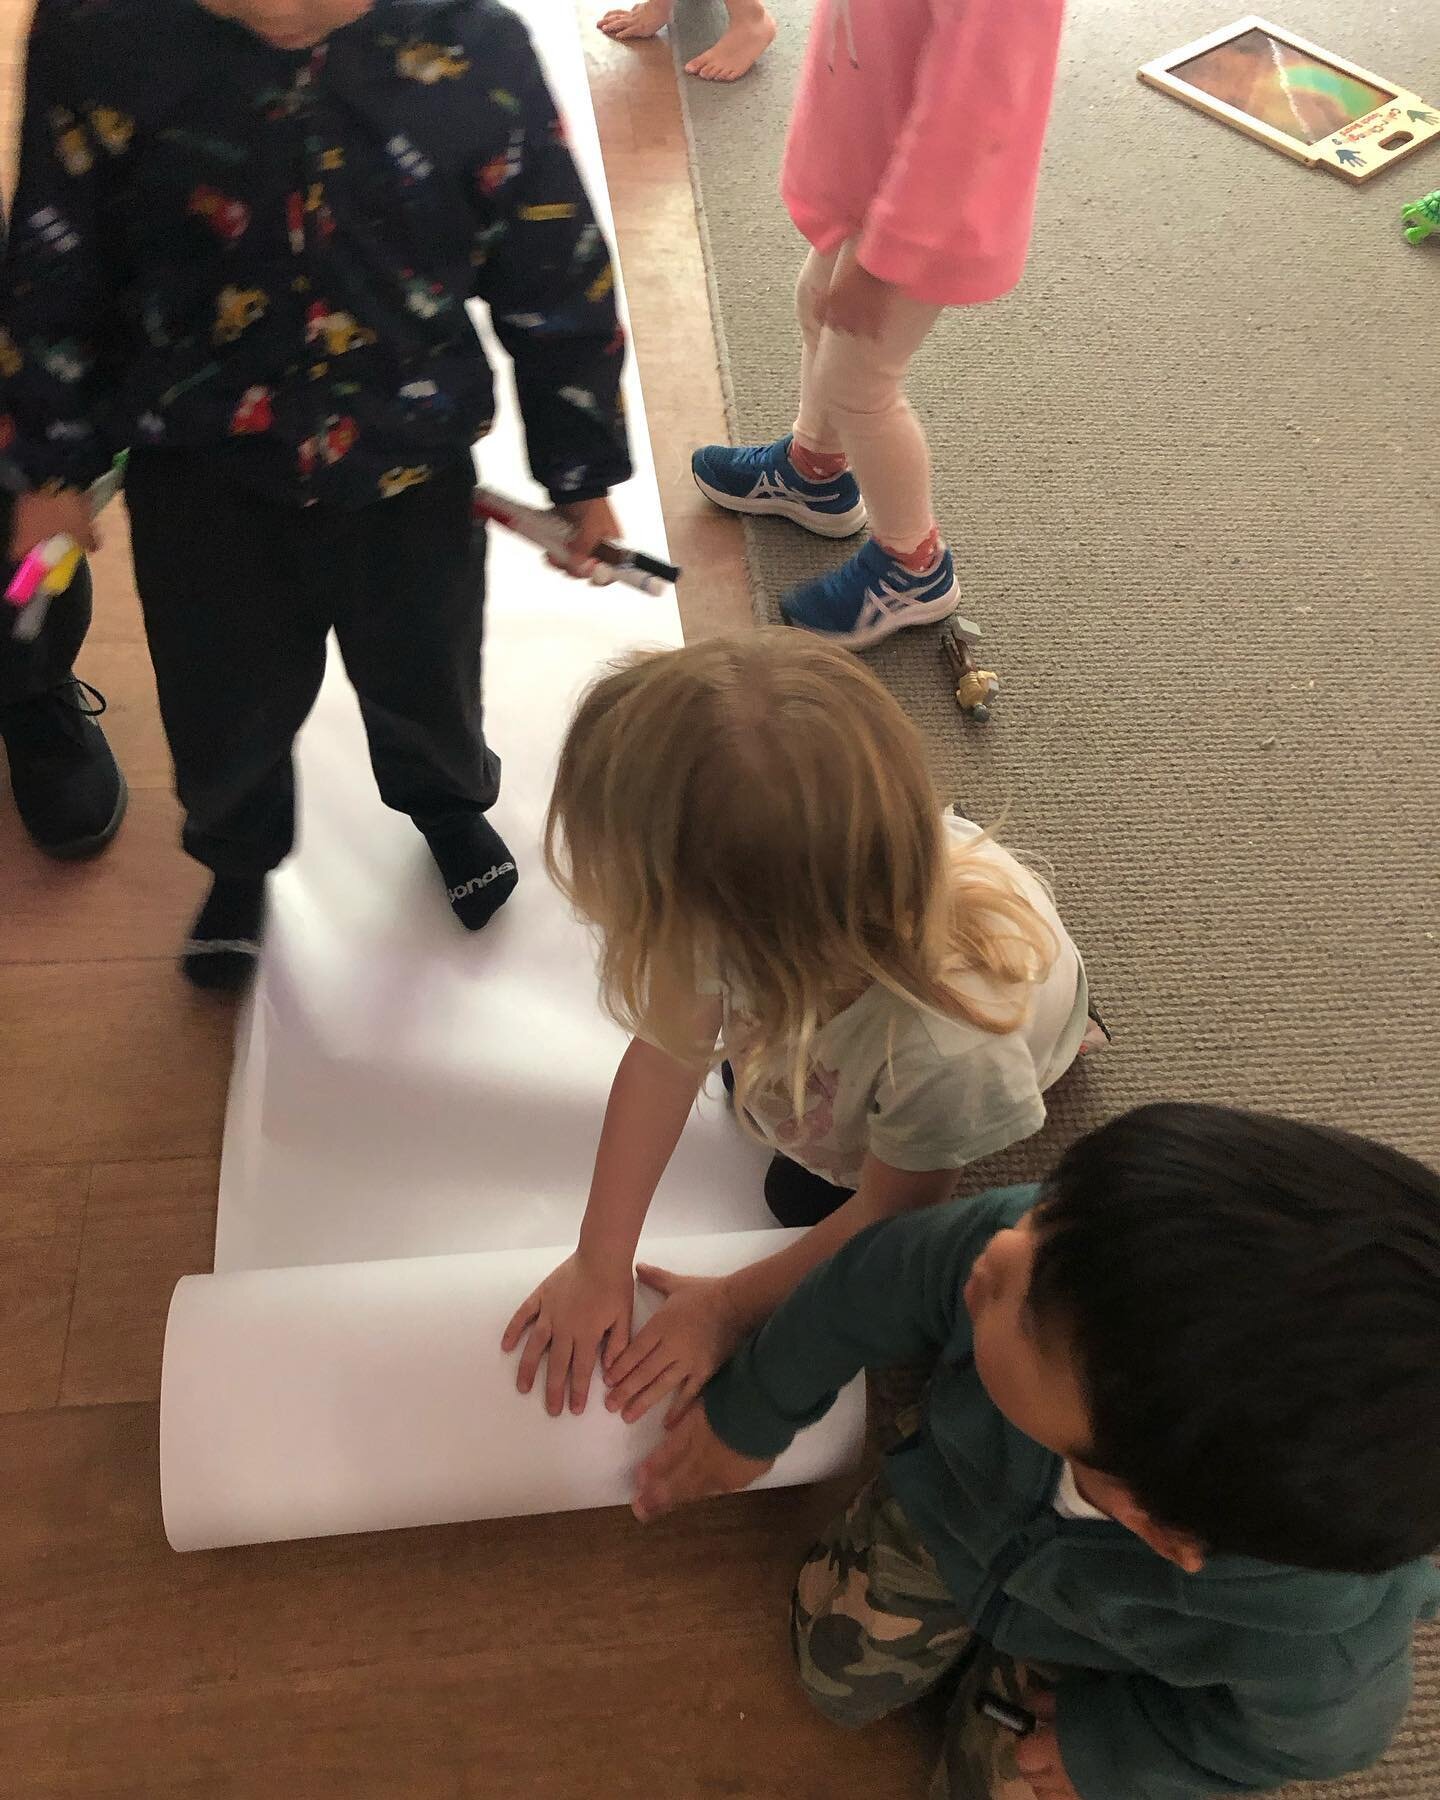 ELC children developing their pencil grip and fine motor skills. We helped set up the experience as we rolled out the paper and then taped it down at the corners. It was lots of fun drawing and scribbling on the paper.